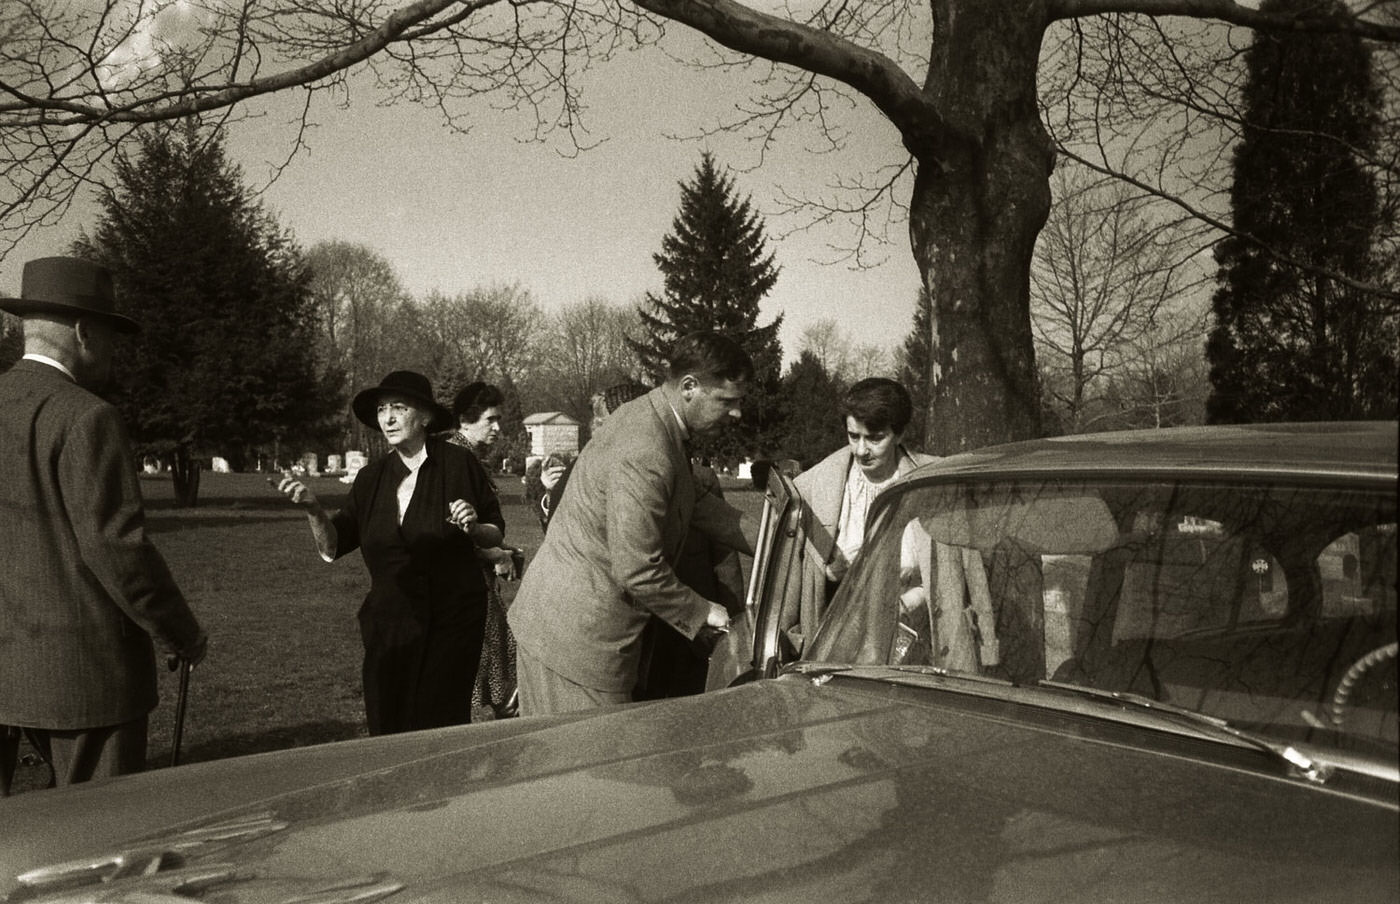 After the cremation service, an unidentified man holds a car door open for Albert Einstein's secretary, Helen Dukas, as she leaves the premises in April 1955.